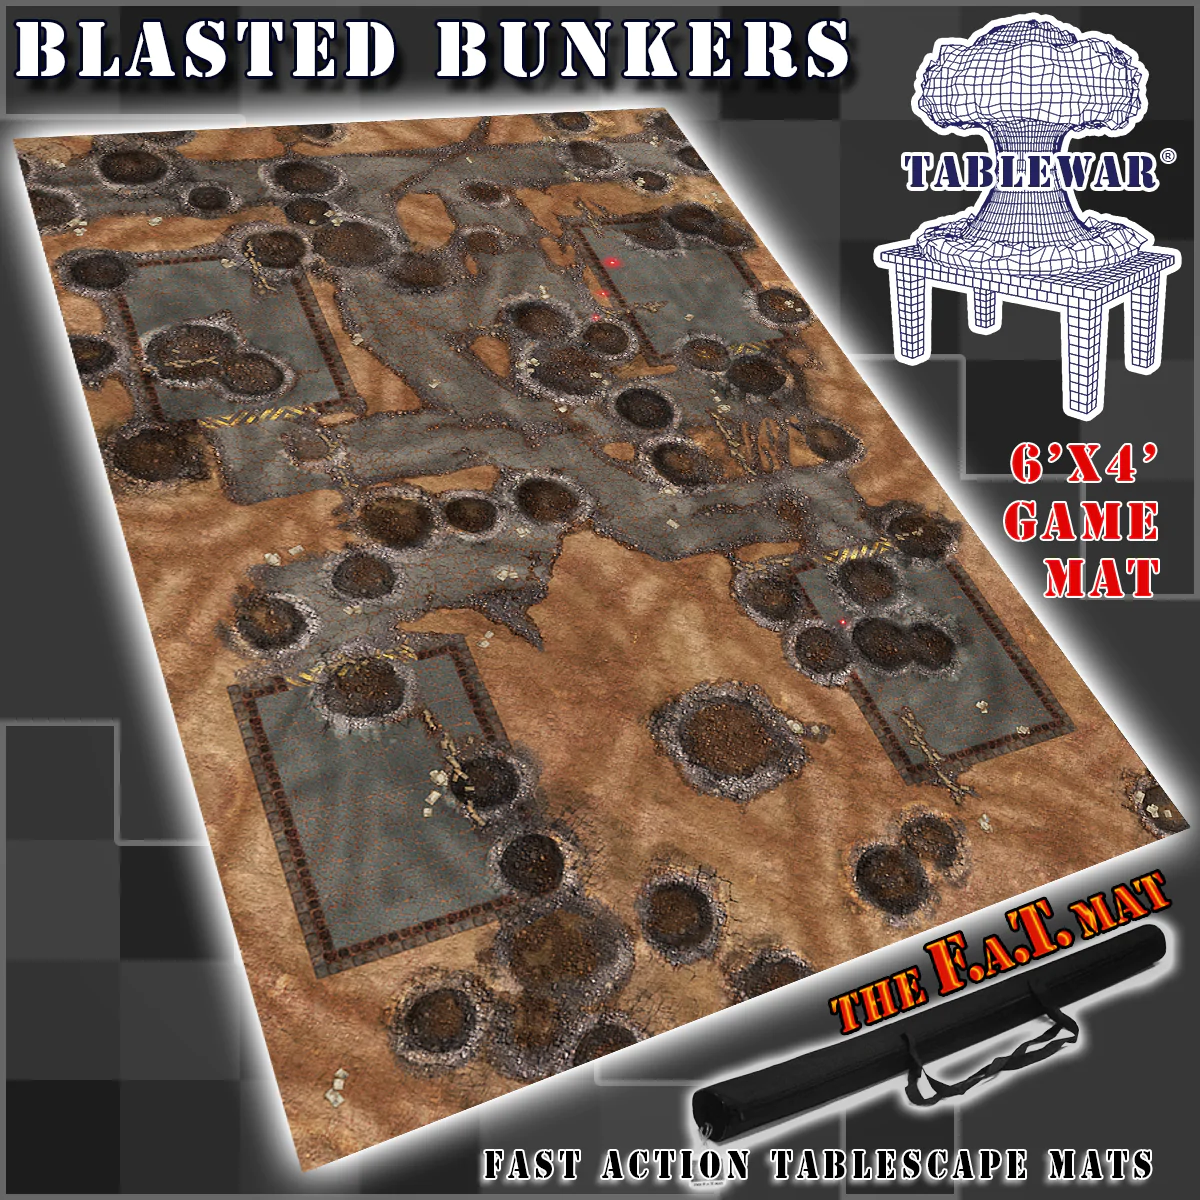 F.A.T. Mats: BLASTED BUNKERS 6 X 4 